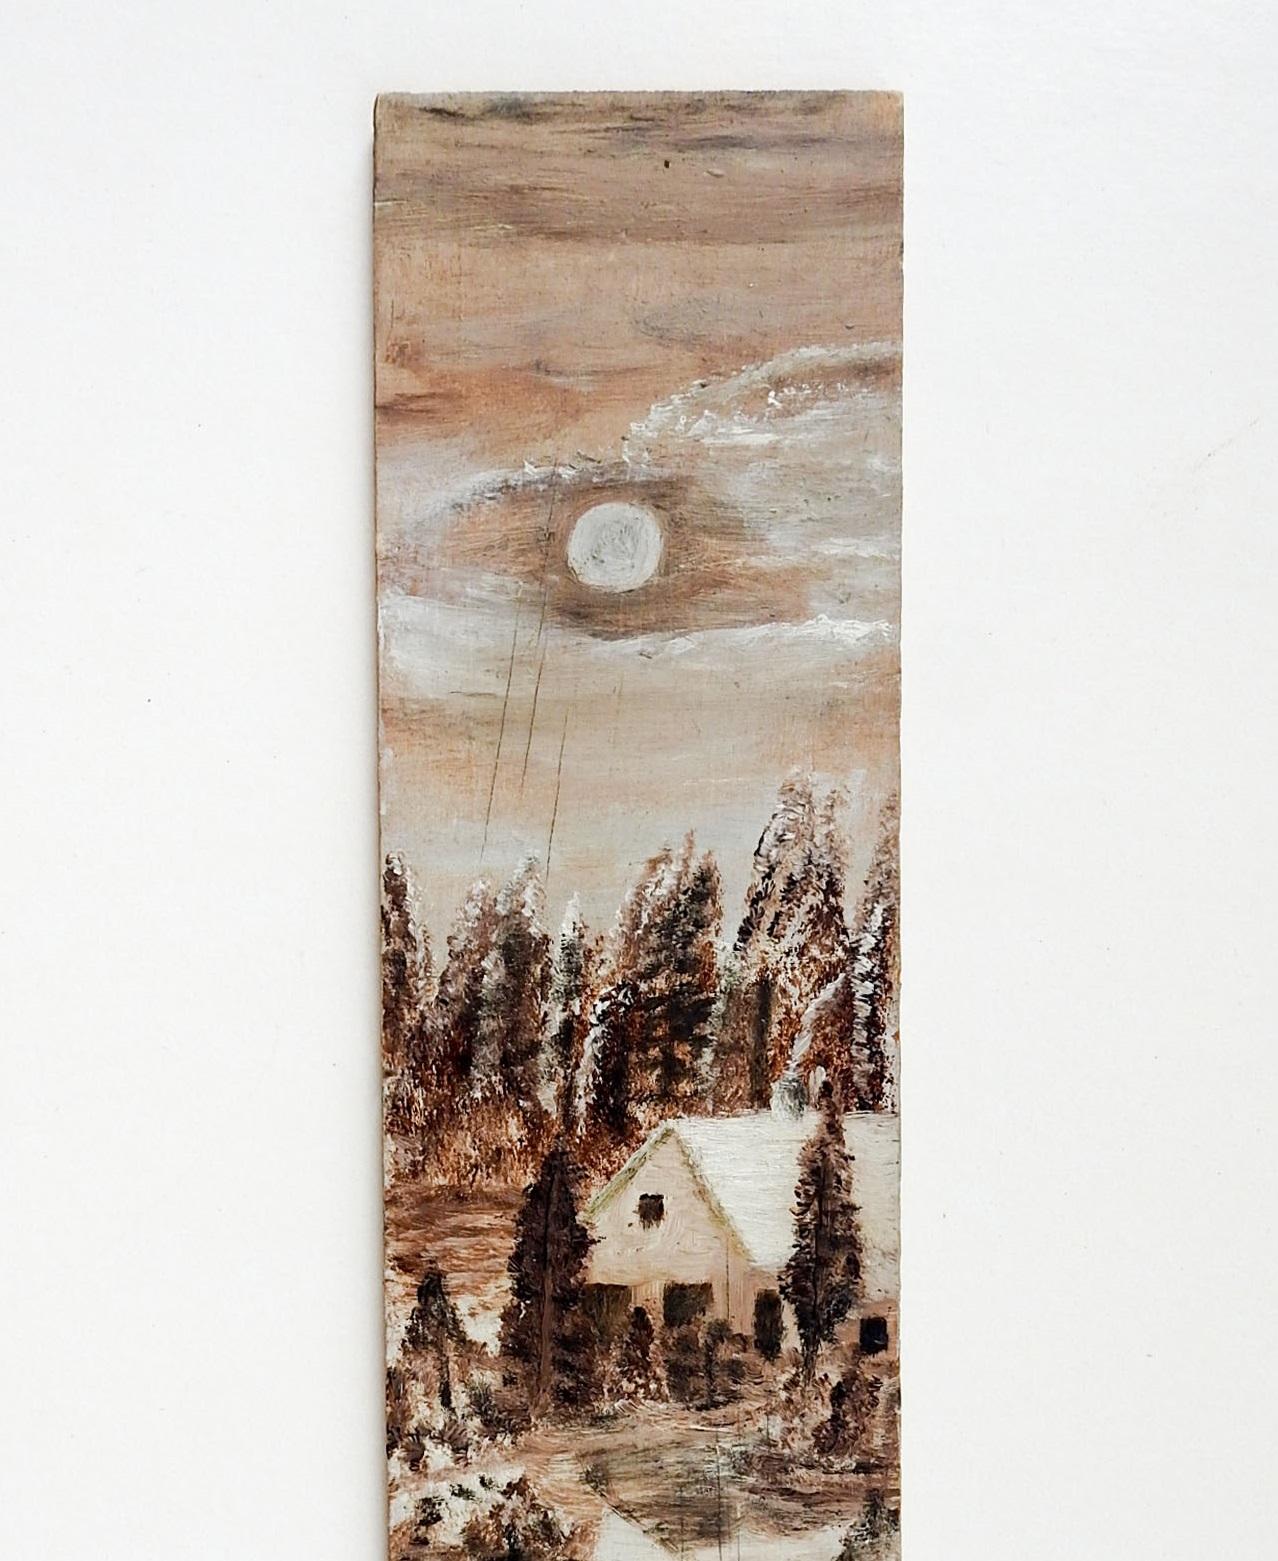 Antique circa 1915 oil on wood board folk art winter forest cabin scene painting, wood is from an old tobacco crate. Unsigned. Unframed, edge wear.